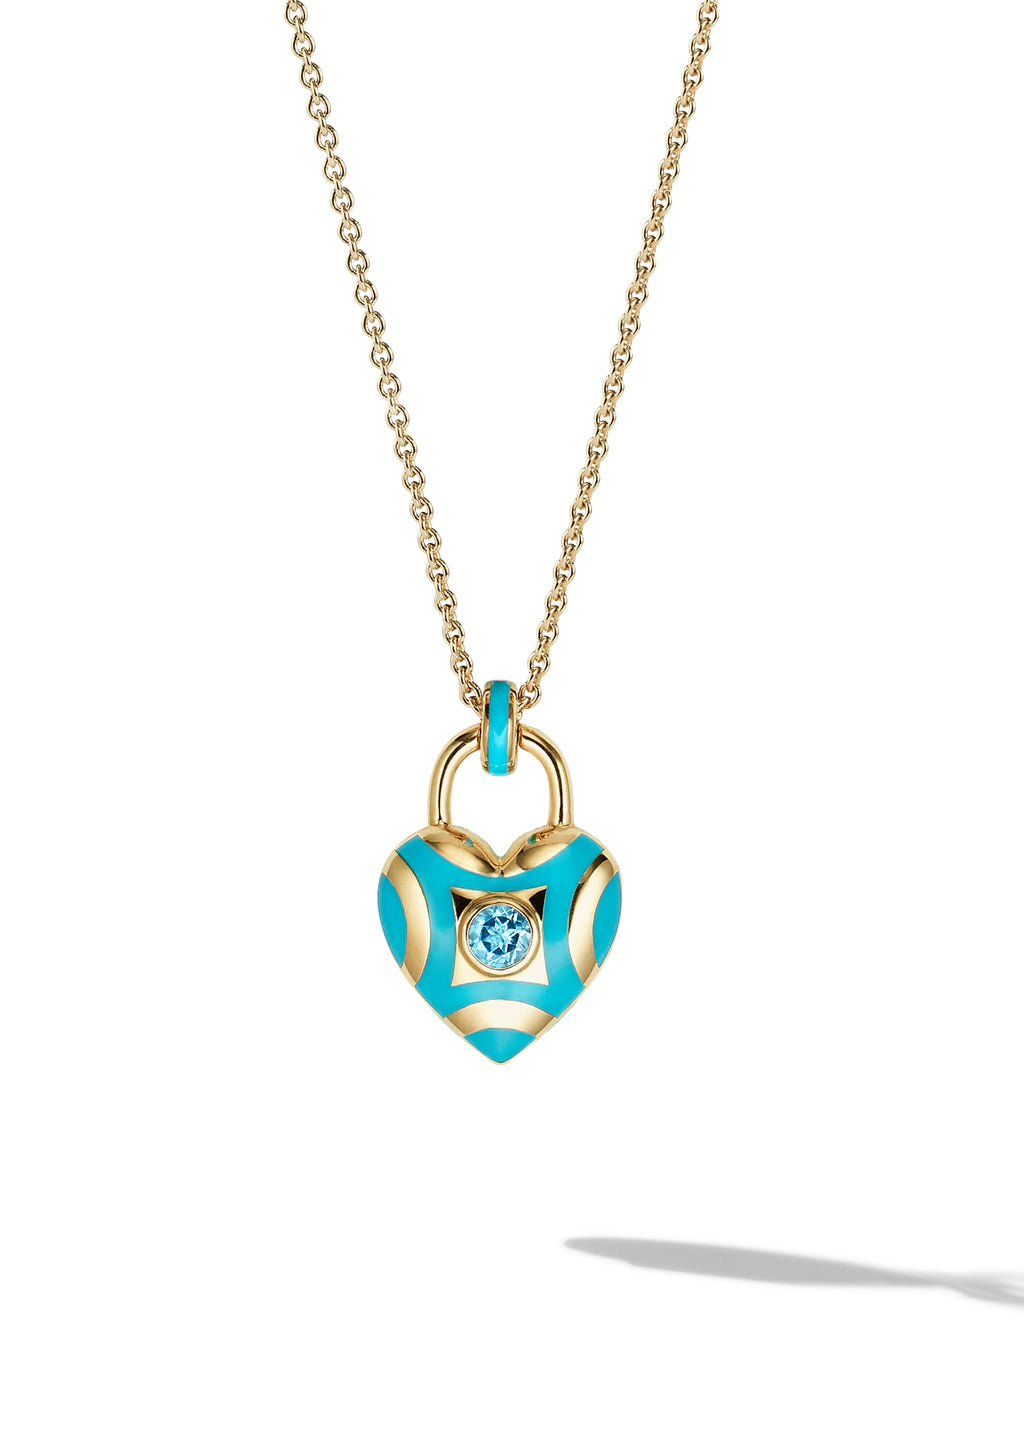 The Pop Heart Charm Necklace